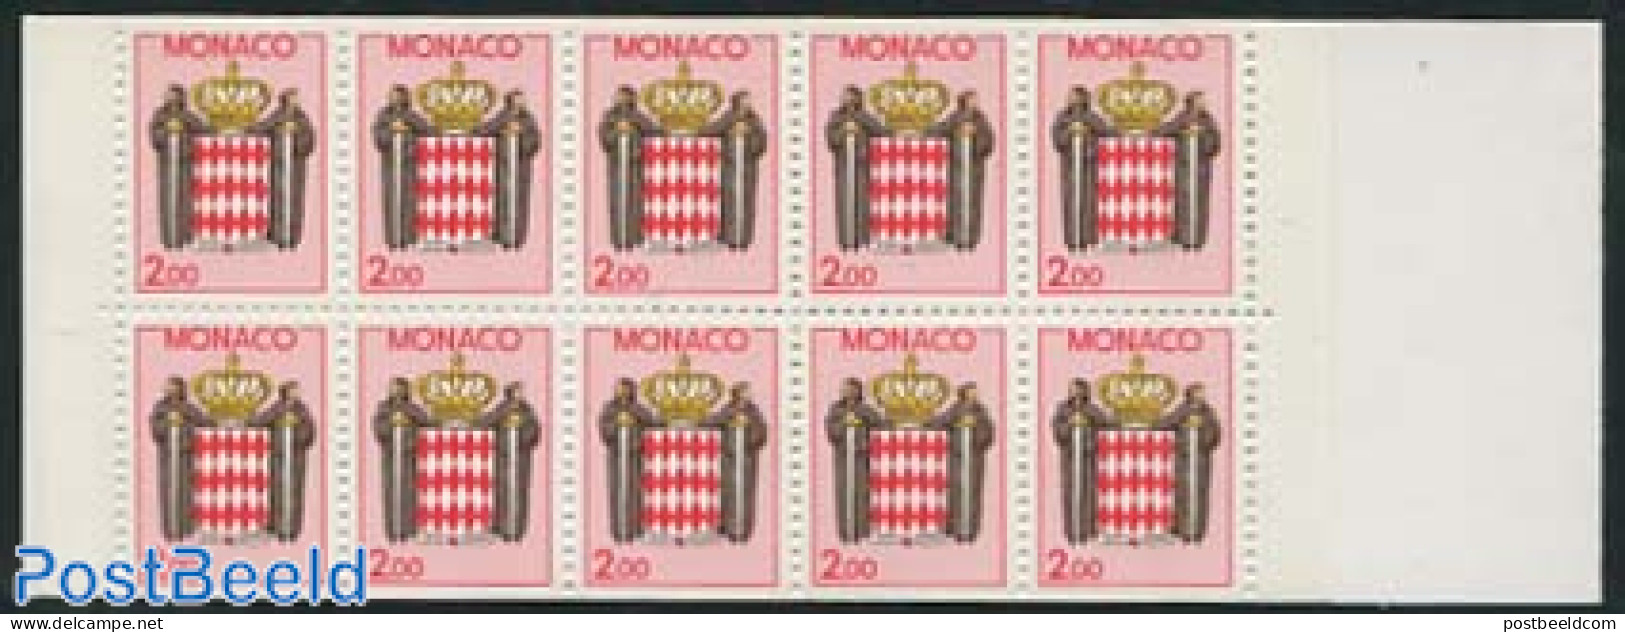 Monaco 1988 Coat Of Arms Booklet, Mint NH, History - Coat Of Arms - Stamp Booklets - Unused Stamps